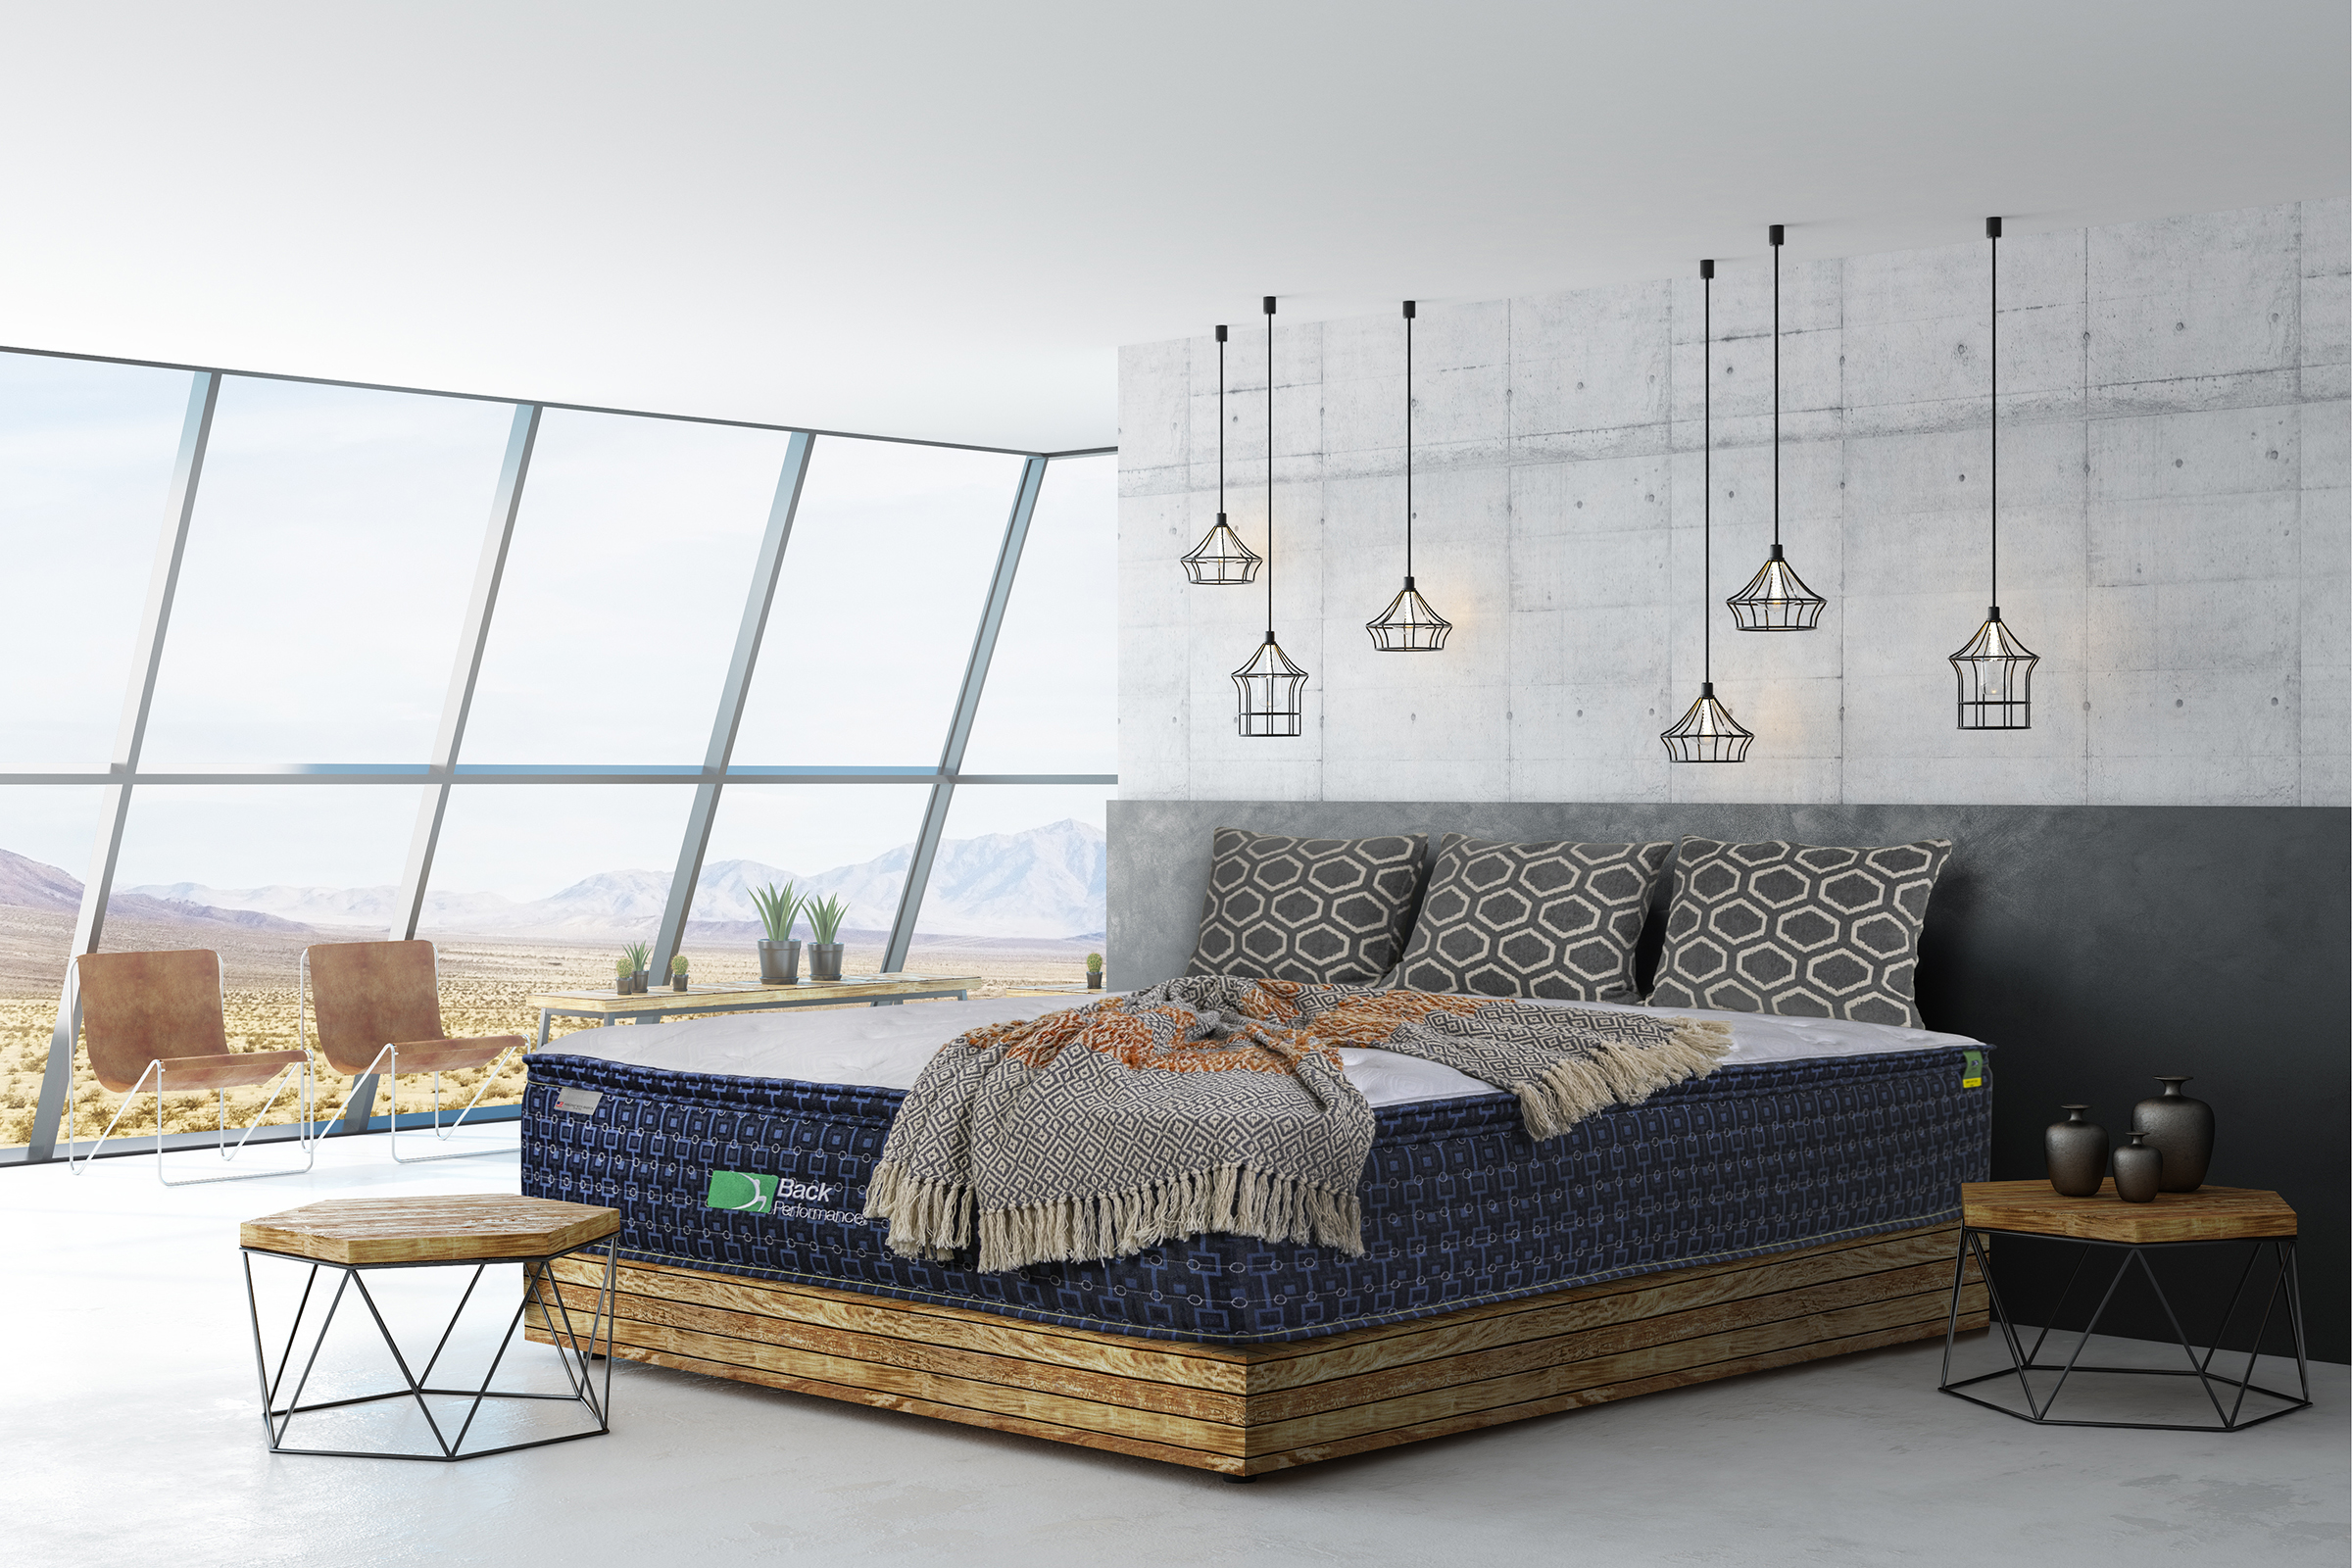 Modern loft spacious room with concrete floor and walls, ceiling-to-floor window and mountain view. 3D render